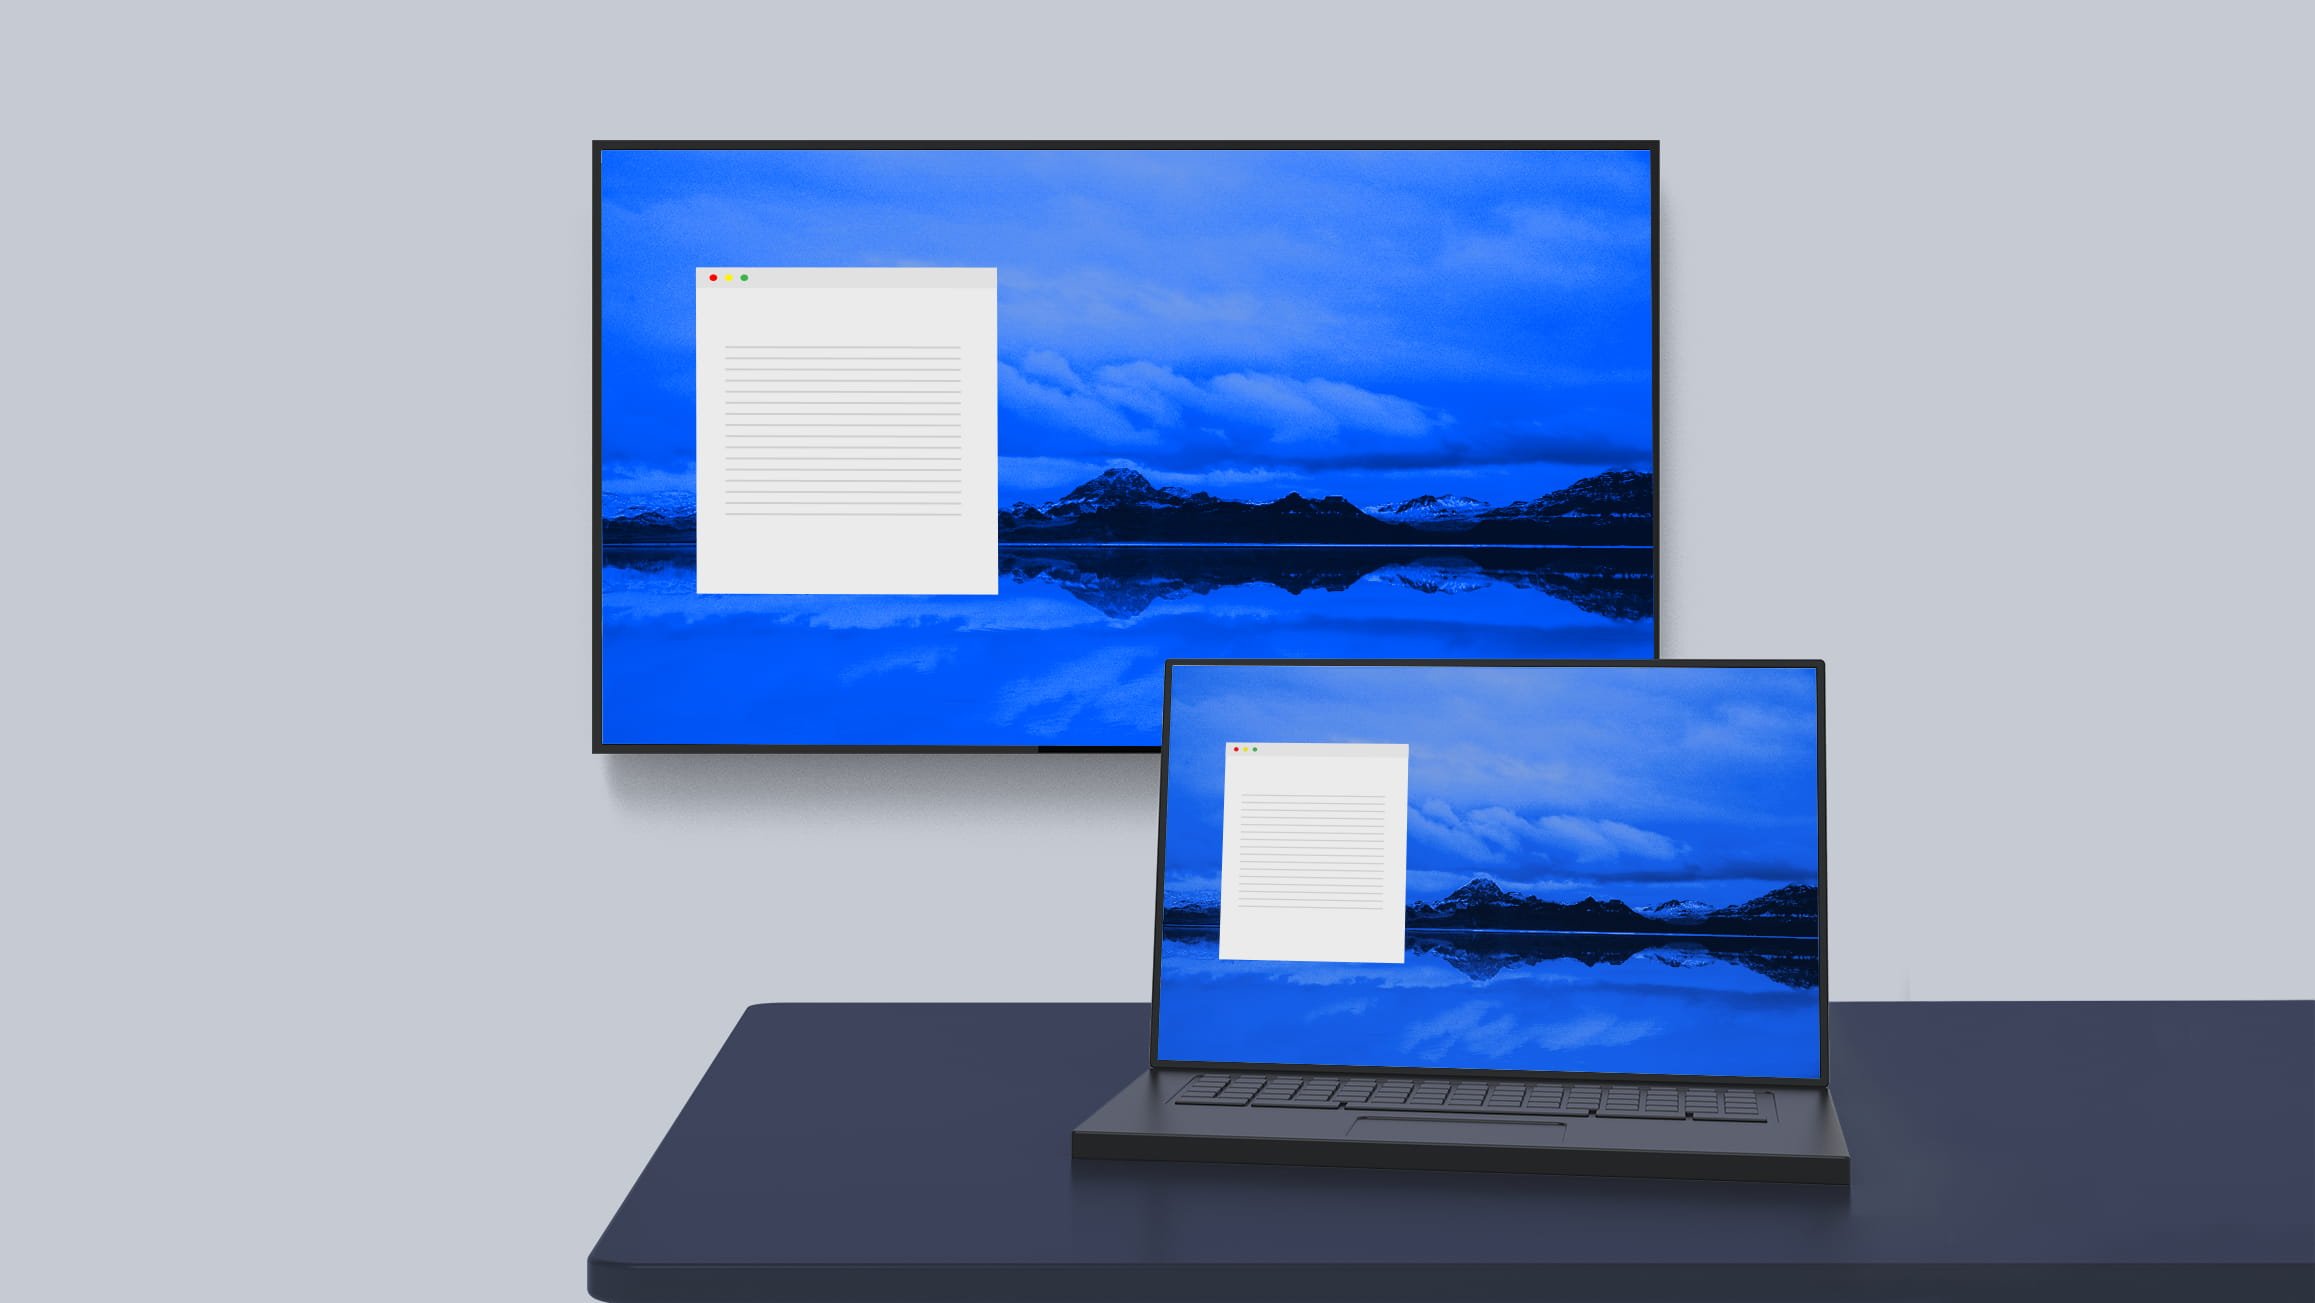 How Screen Mirroring Works Check, What Devices Does Screen Mirroring Work With